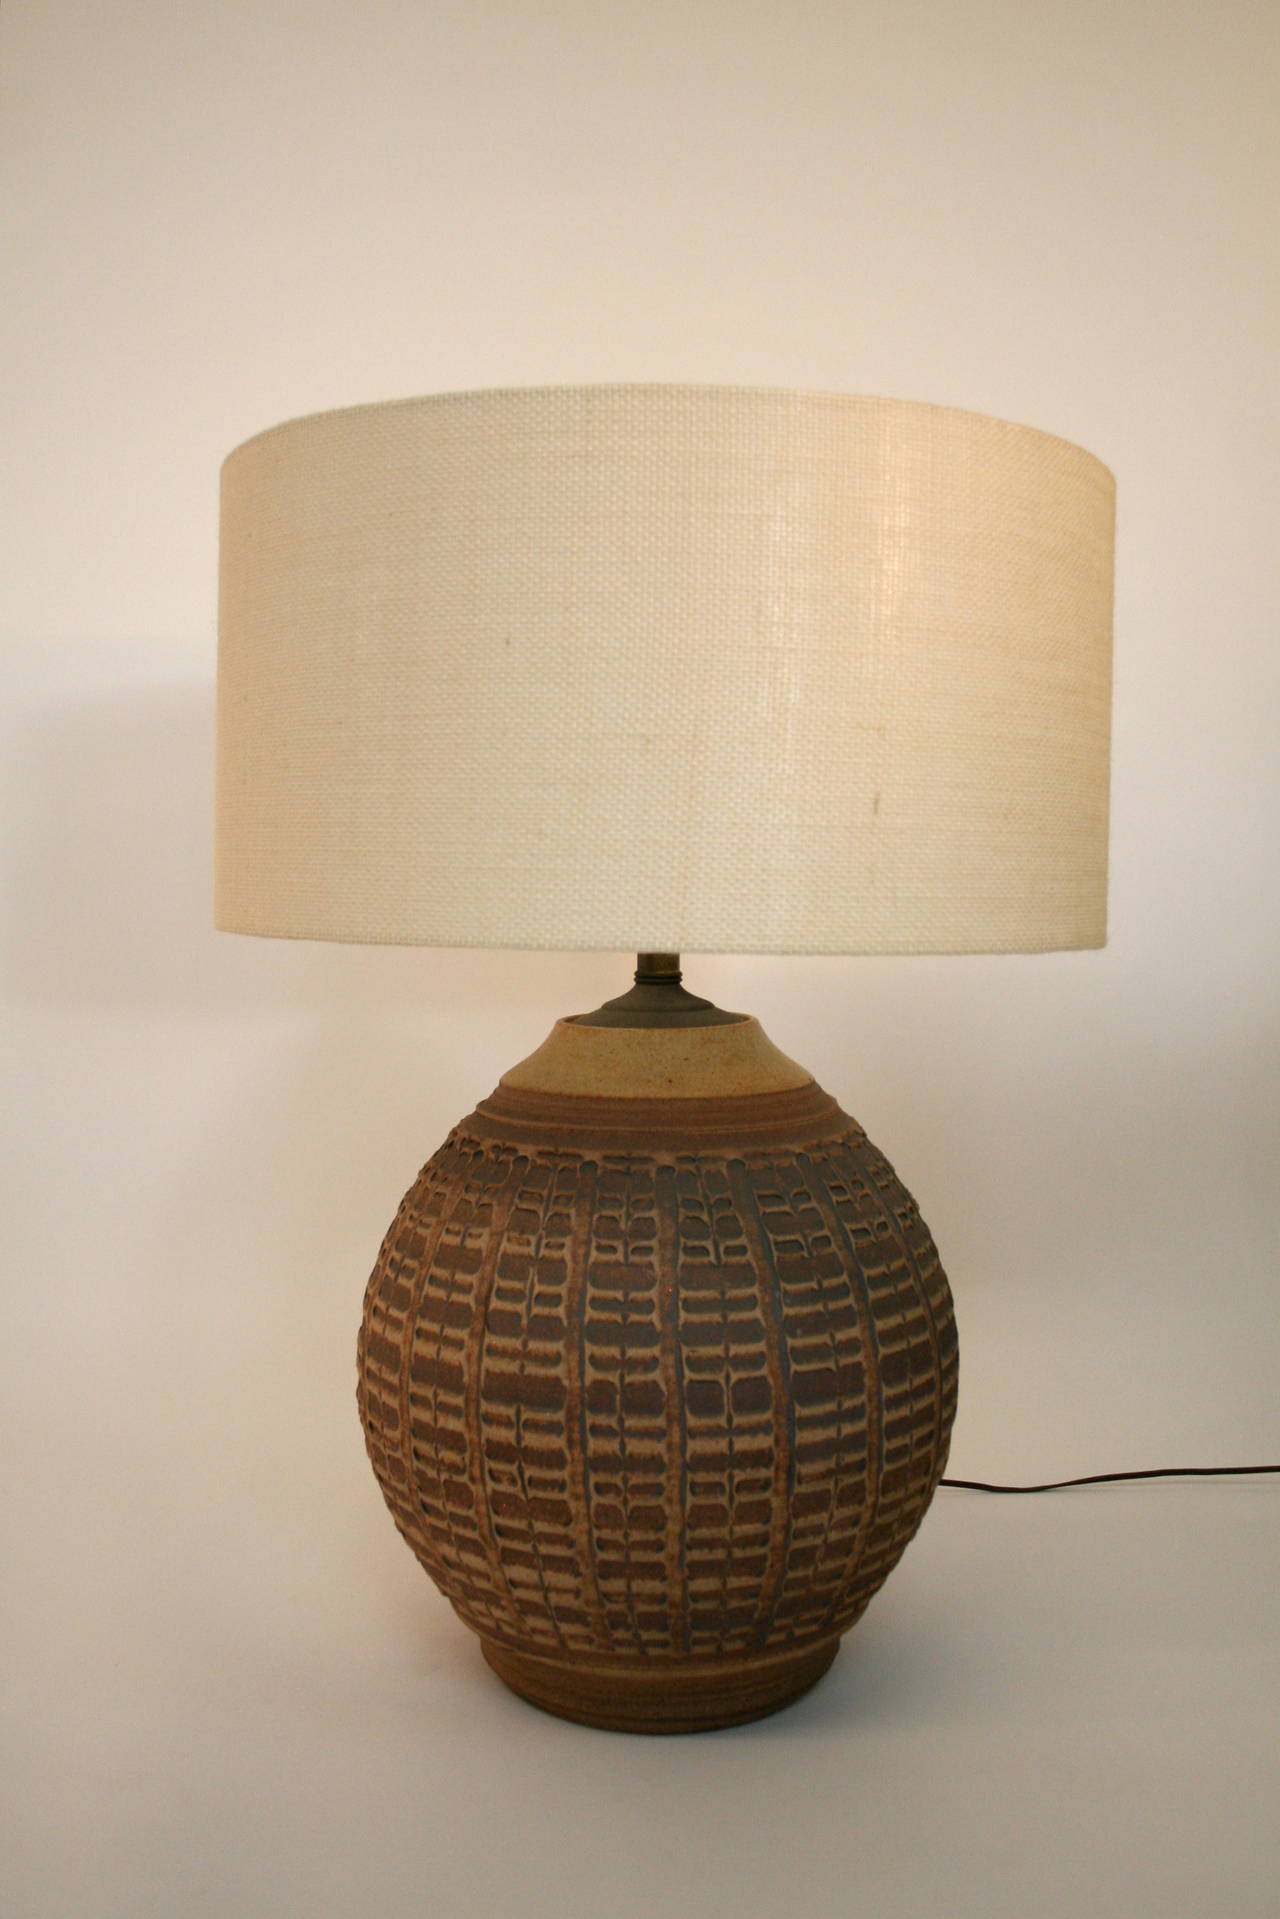 Large Studio Pottery Lamp by Bob Kinzie for Affiliated Craftsmen.  Circa 1960's.